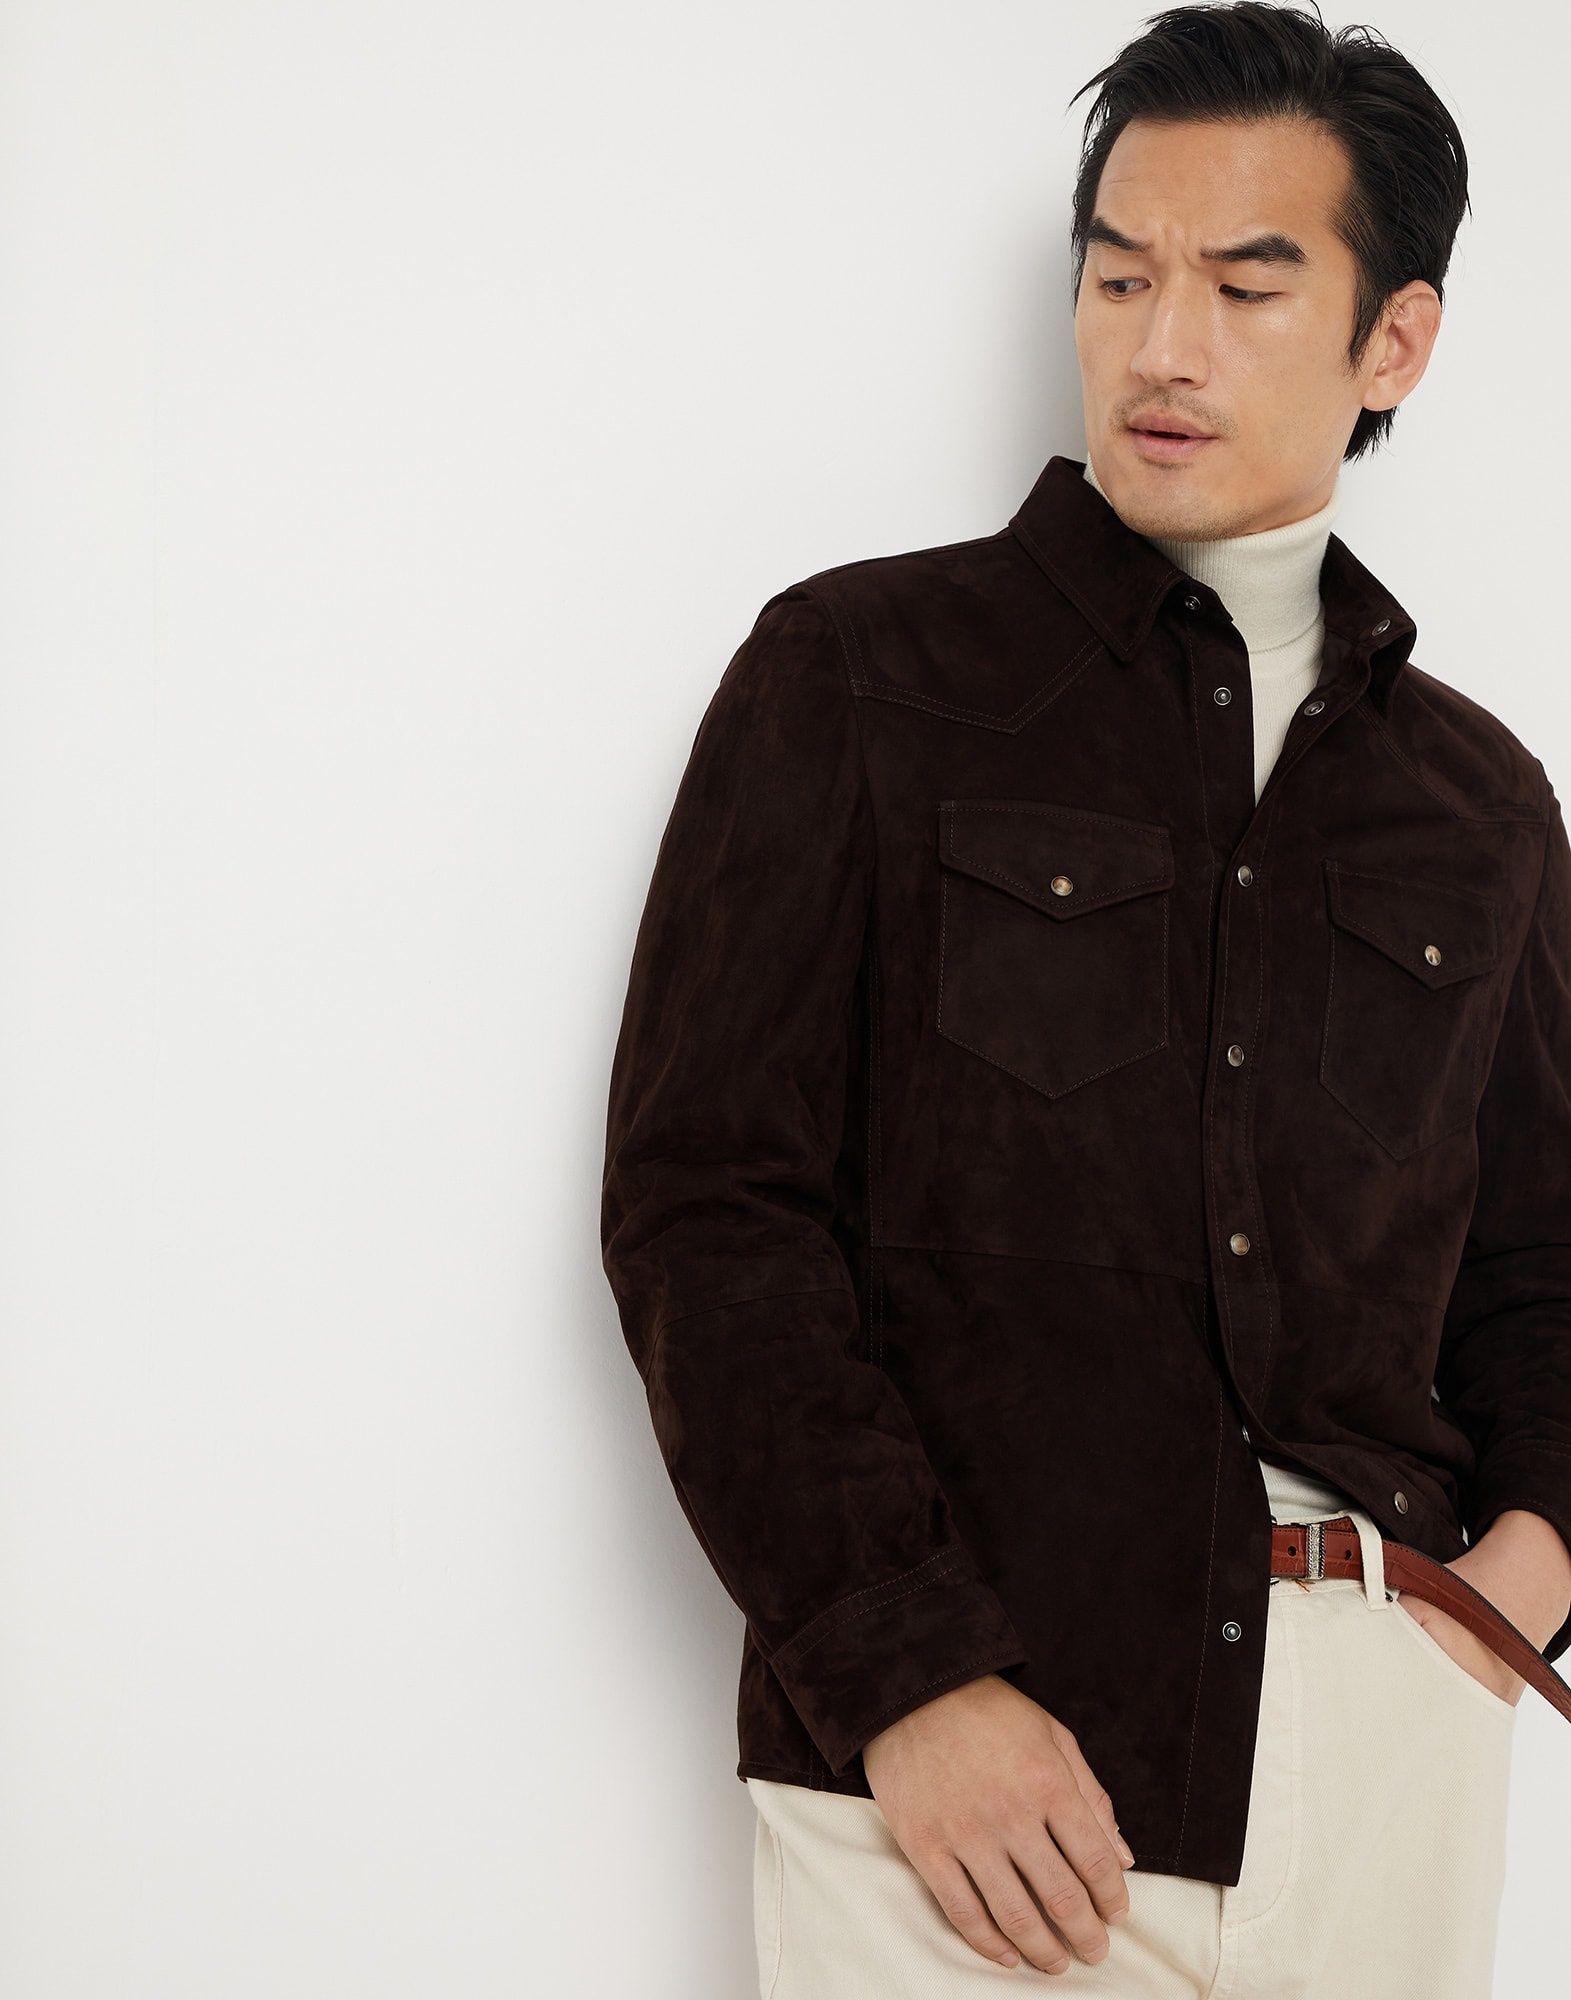 Double face suede shirt-style outerwear jacket - 4